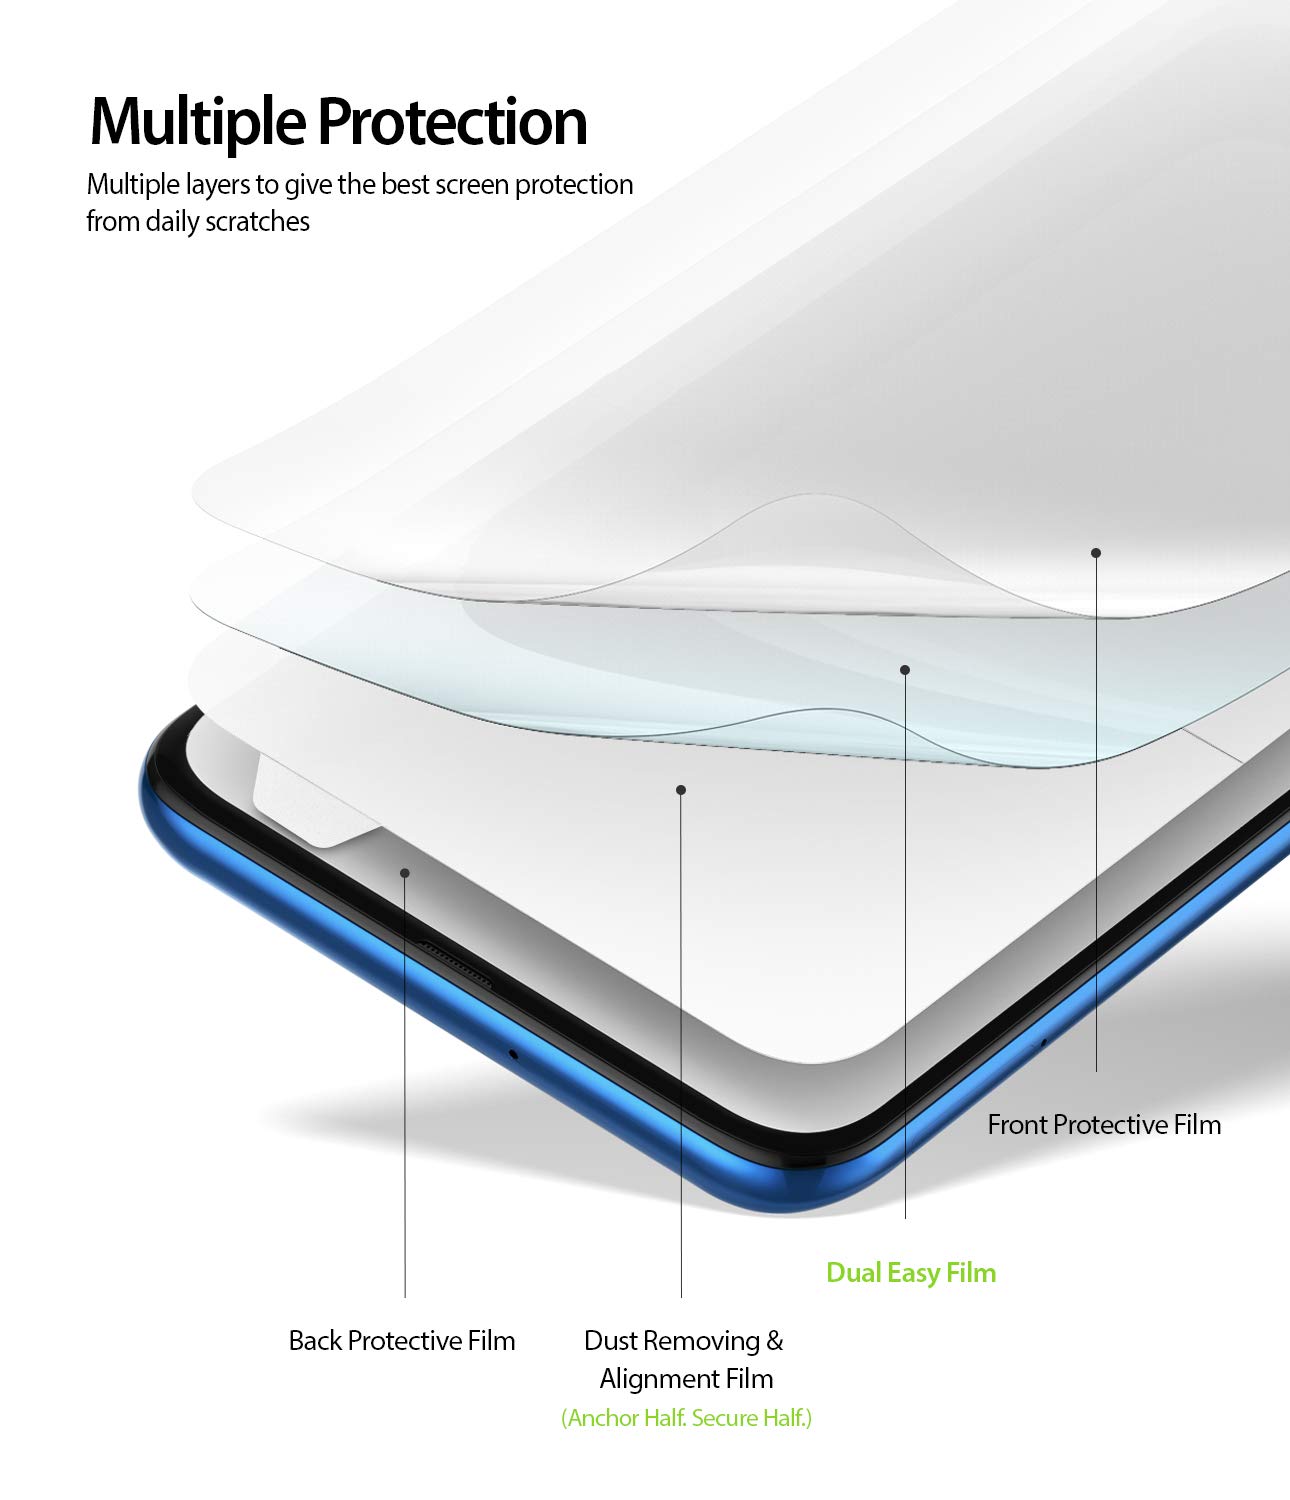 multiple layers to give the best screen protection from daily scratches